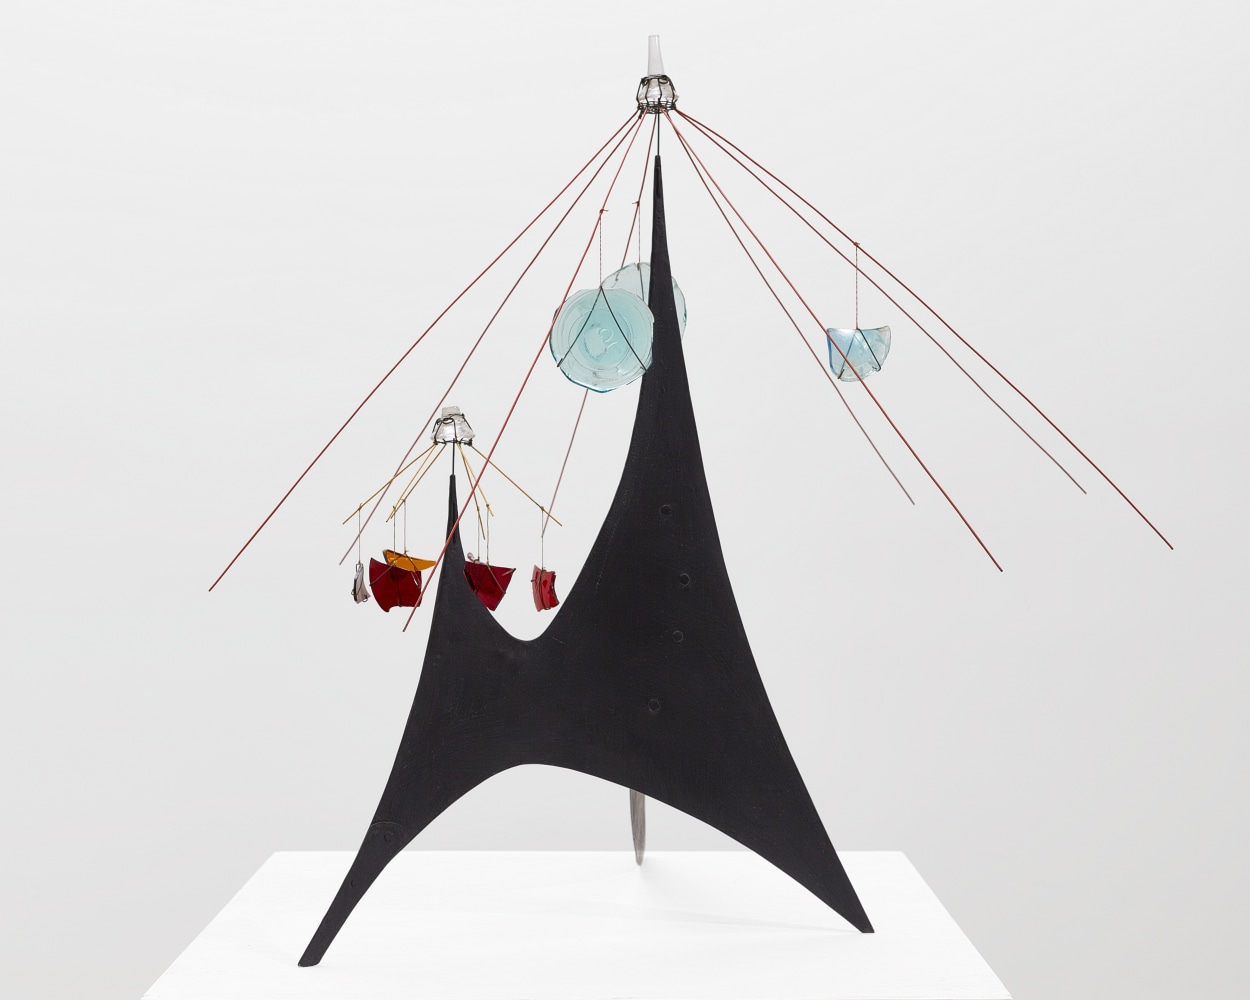 Alexander Calder (1898-1976)
Untitled (Carousel), 1942
Painted metal, wire, glass
28 3/8 x 32 x 32 in
72.1 x 81.3 x 81.3 cm